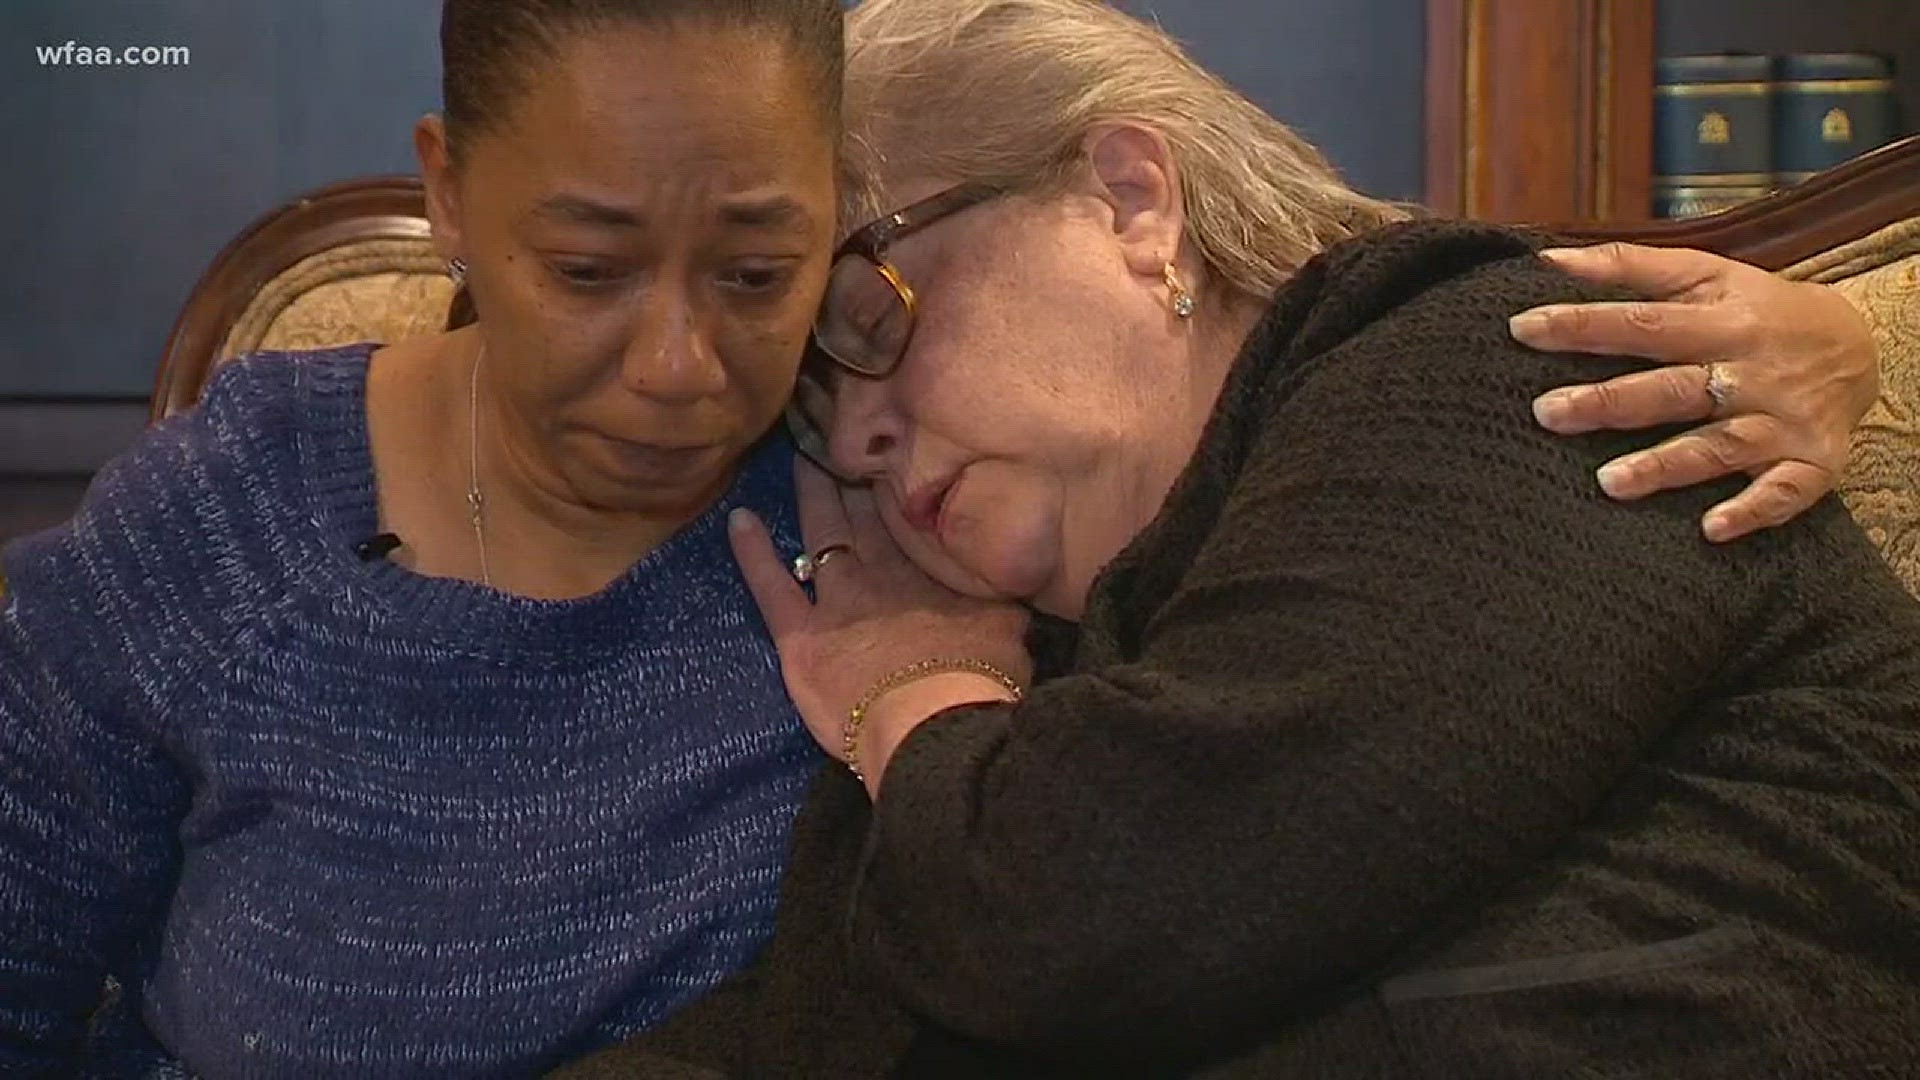 Two mothers share grief after sergeant's indictment